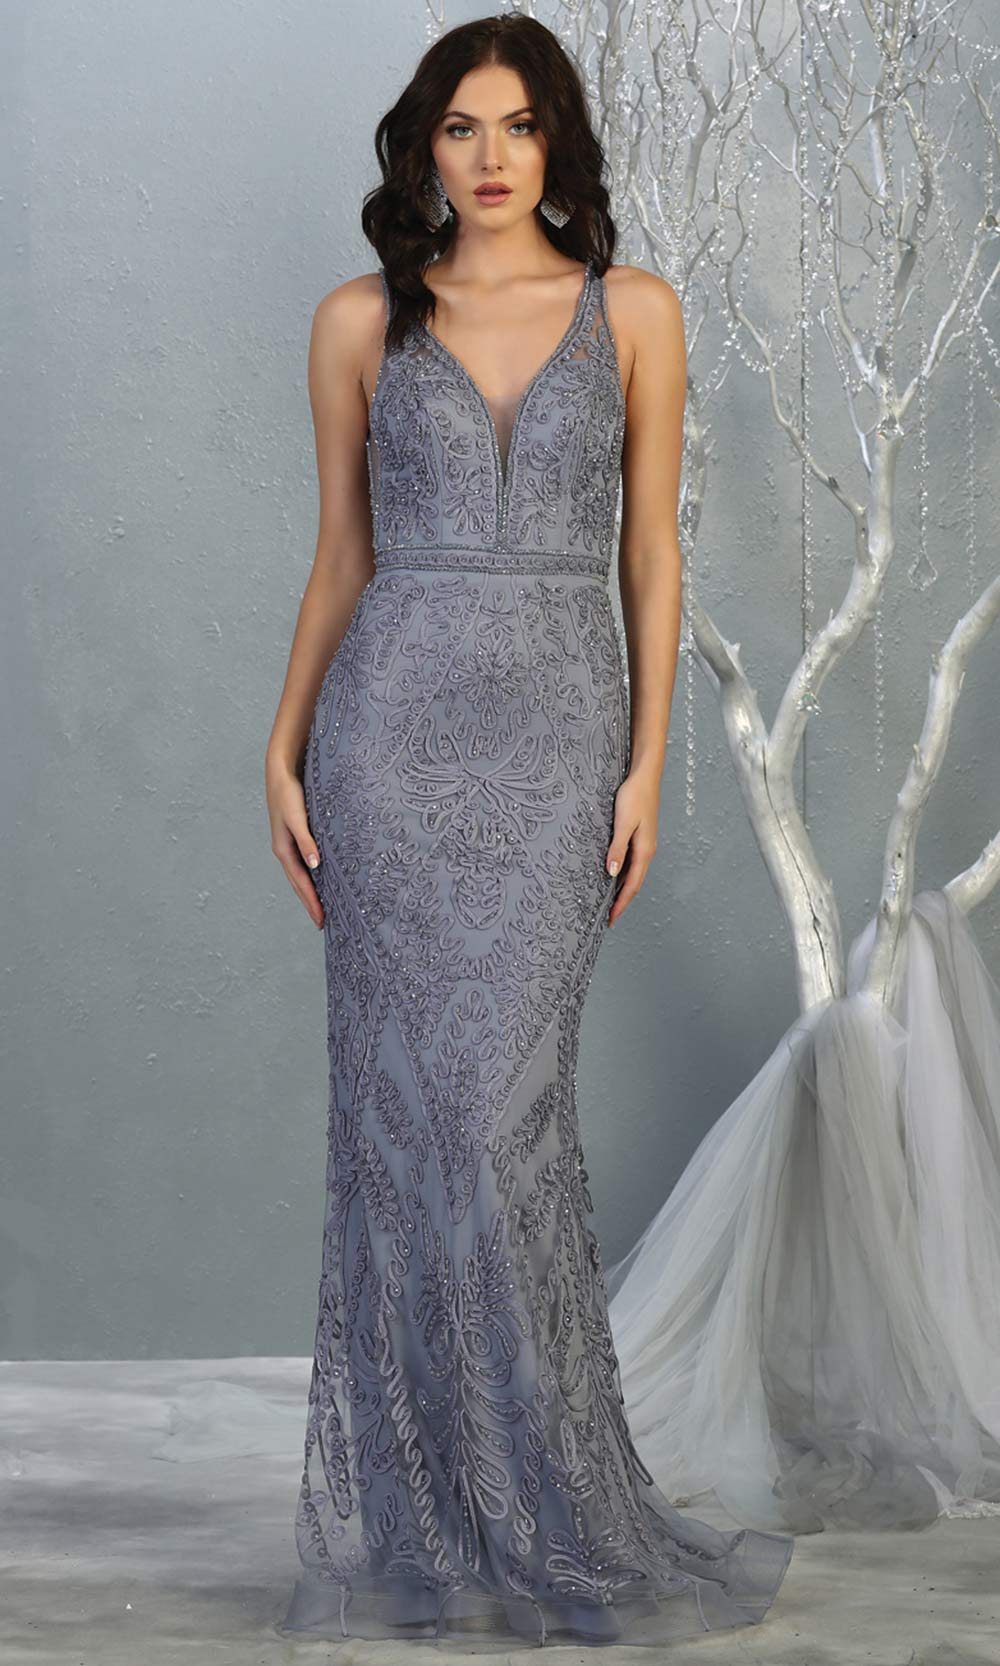 Mayqueen MQ1758 long dusty blue lace evening fitted dress w/low back & wide straps. Full length blue grey gown is perfect for enagagement/e-shoot dress, wedding reception dress, indowestern gown, formal evening party dress, prom. Plus sizes avail.jpg